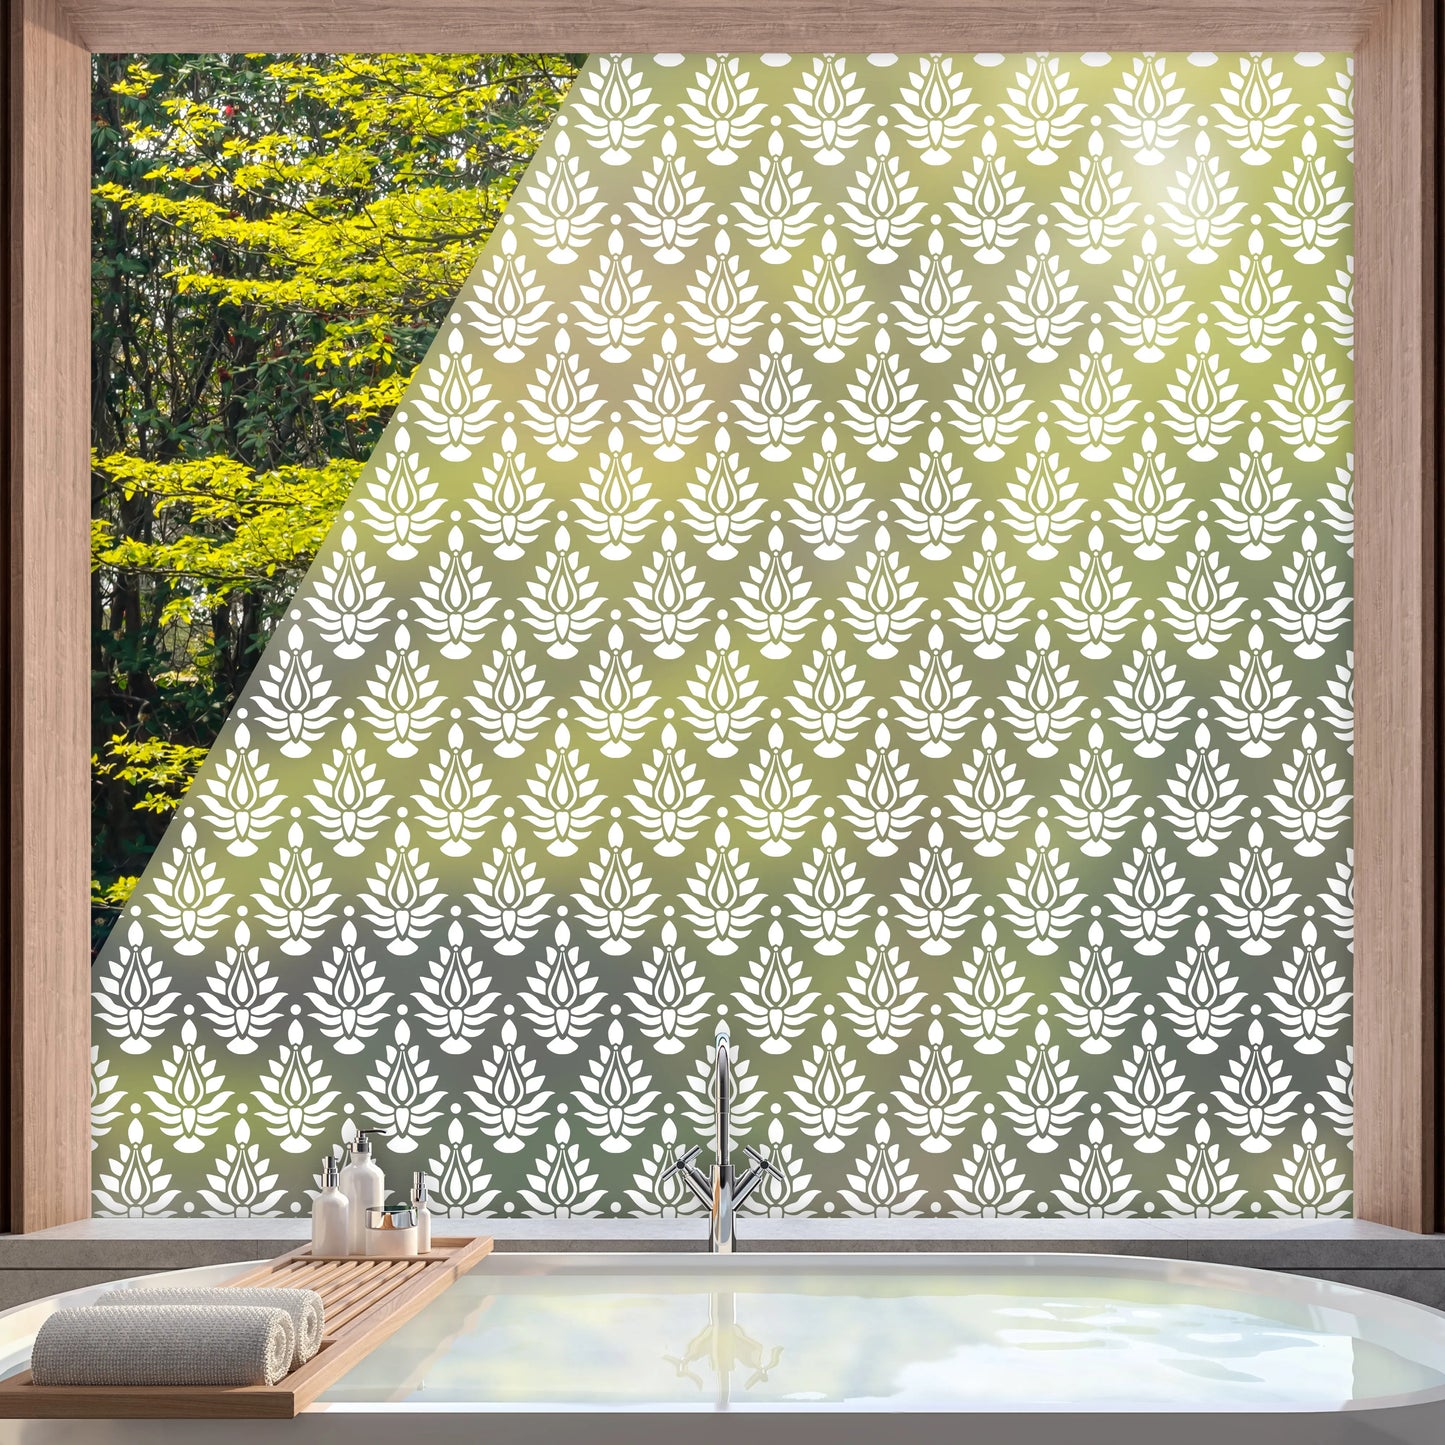 Privacy Window Indore Frosted Window Privacy Panel Dizzy Duck Designs